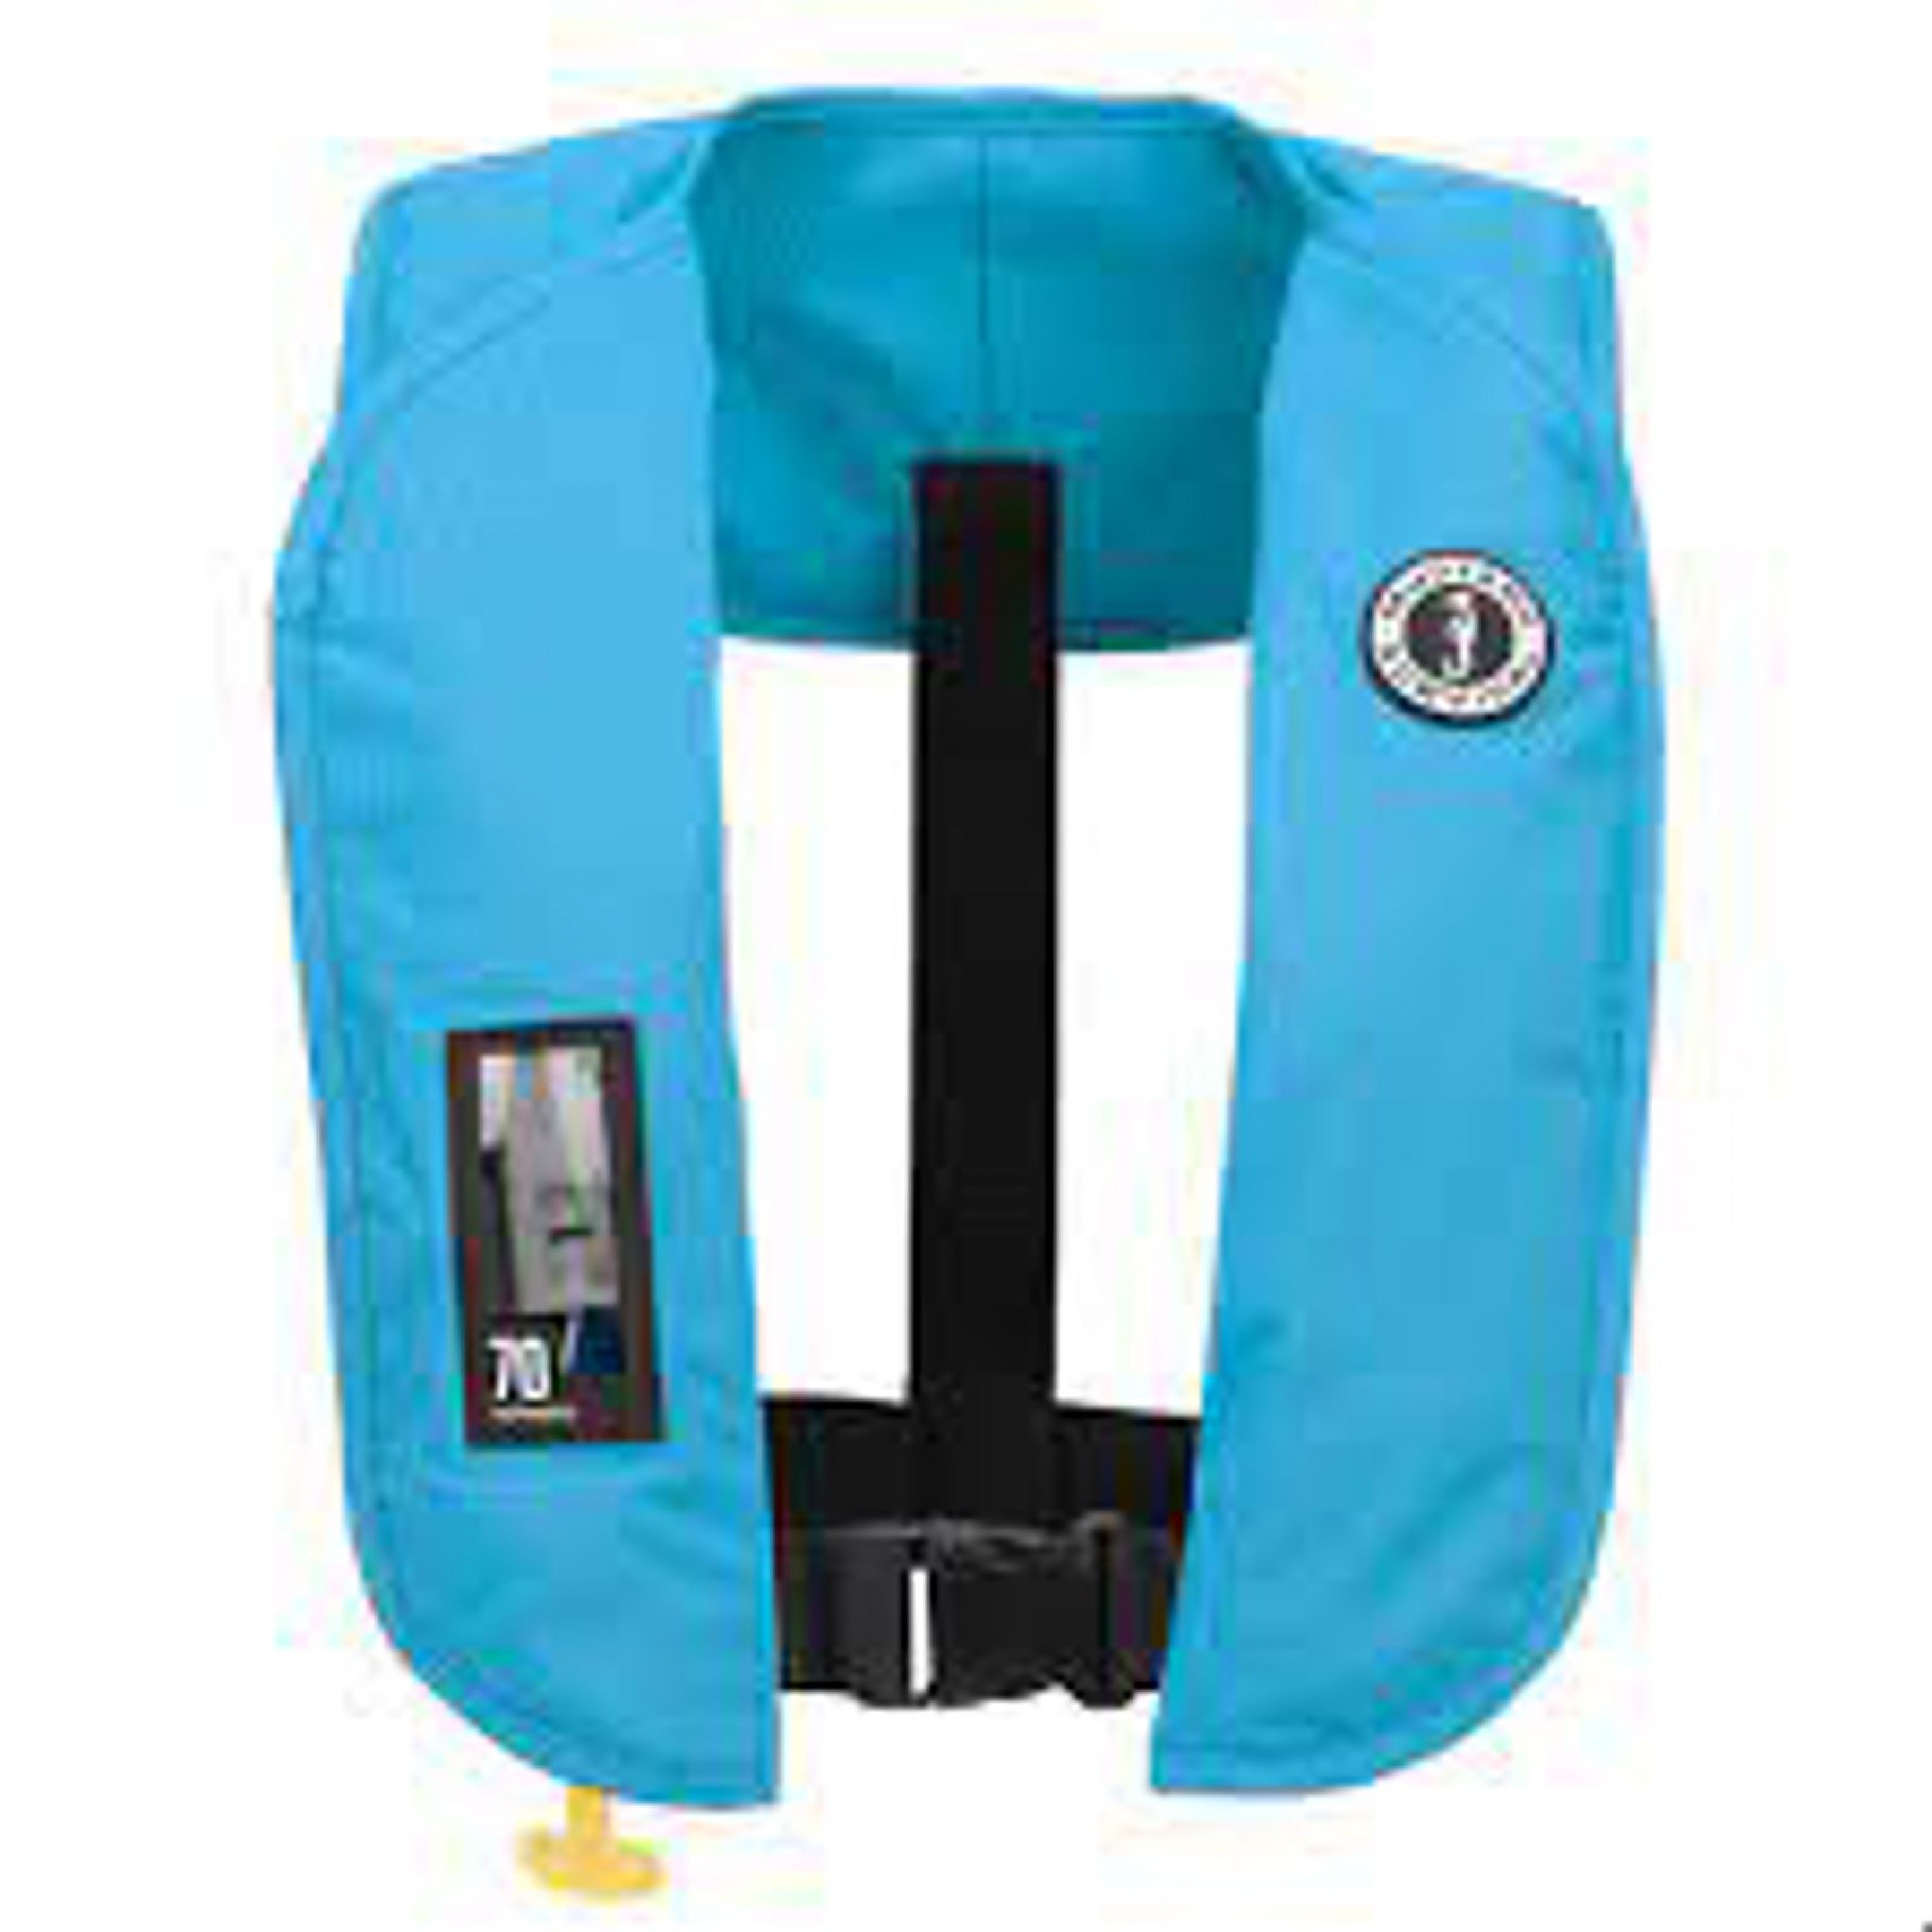 AUTOMATIC INFLATABLE PFD MIT 70 AZURE BLUE